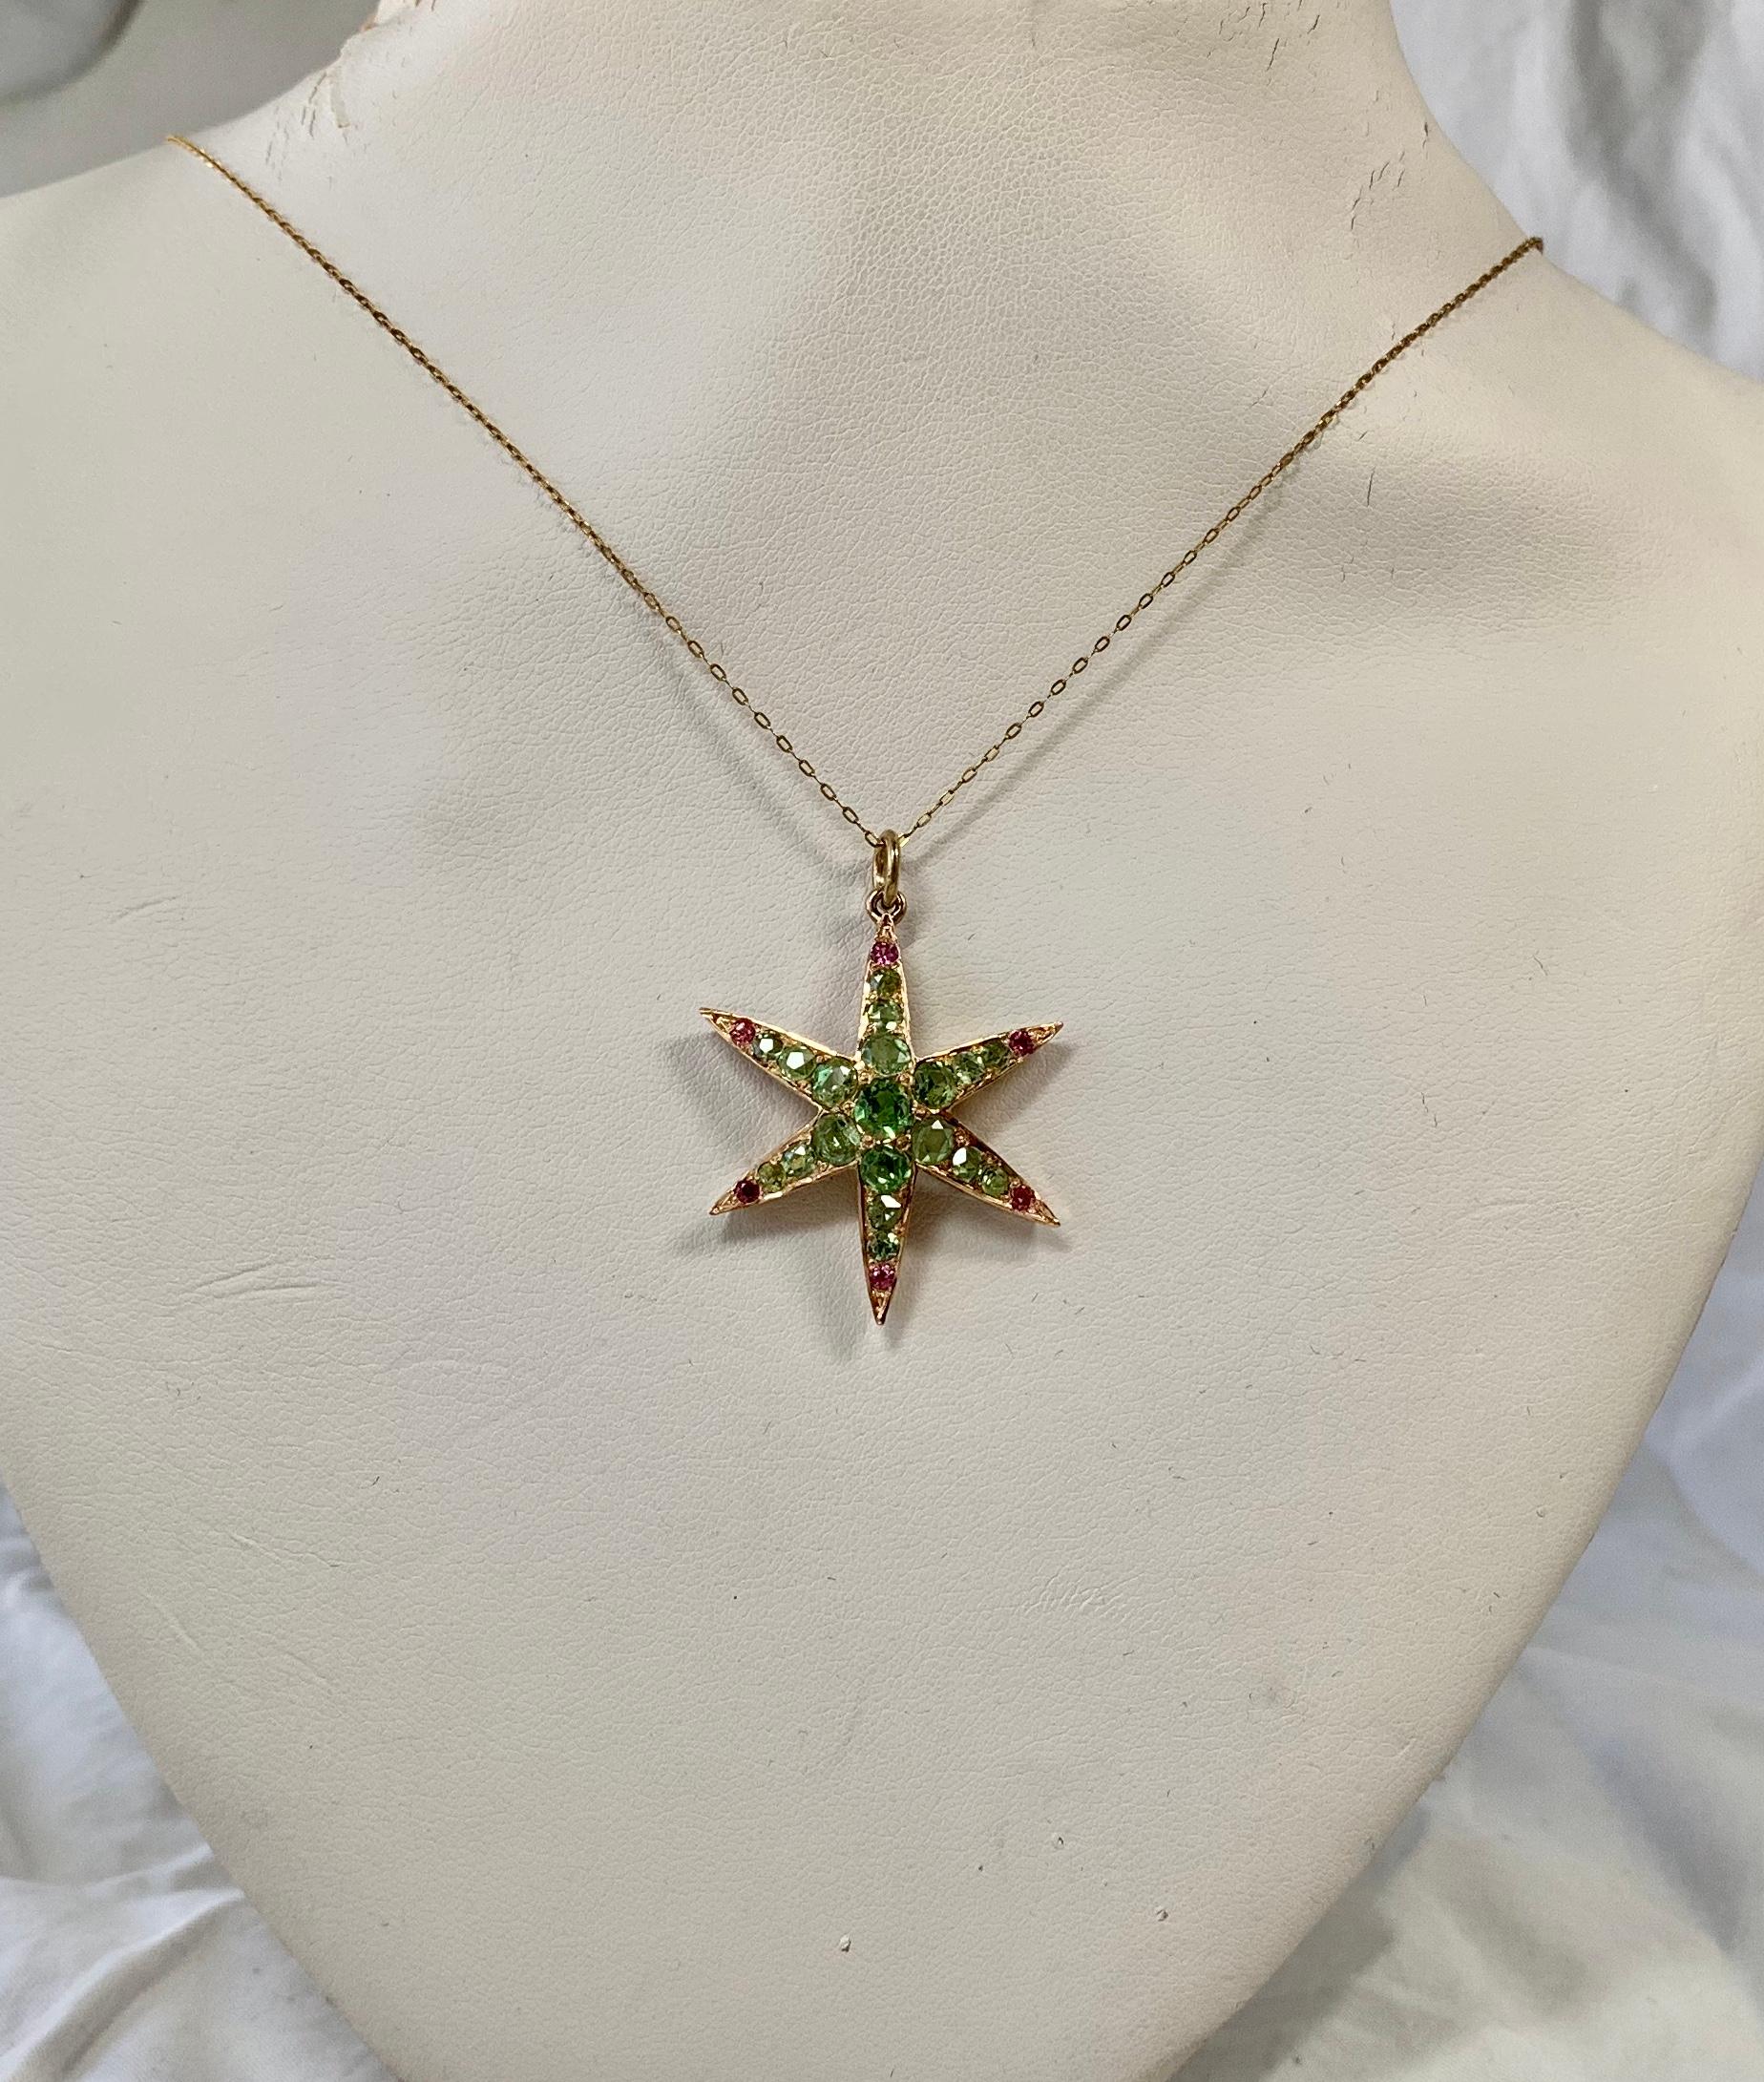 This is a stunning antique Victorian - Edwardian Peridot and Ruby Star Starfish Lavaliere Pendant Necklace in 14 Karat Gold.  The gorgeous star motif pendant is set with 19 sparkling round faceted graduated Peridot gems.  At each of the six ends of